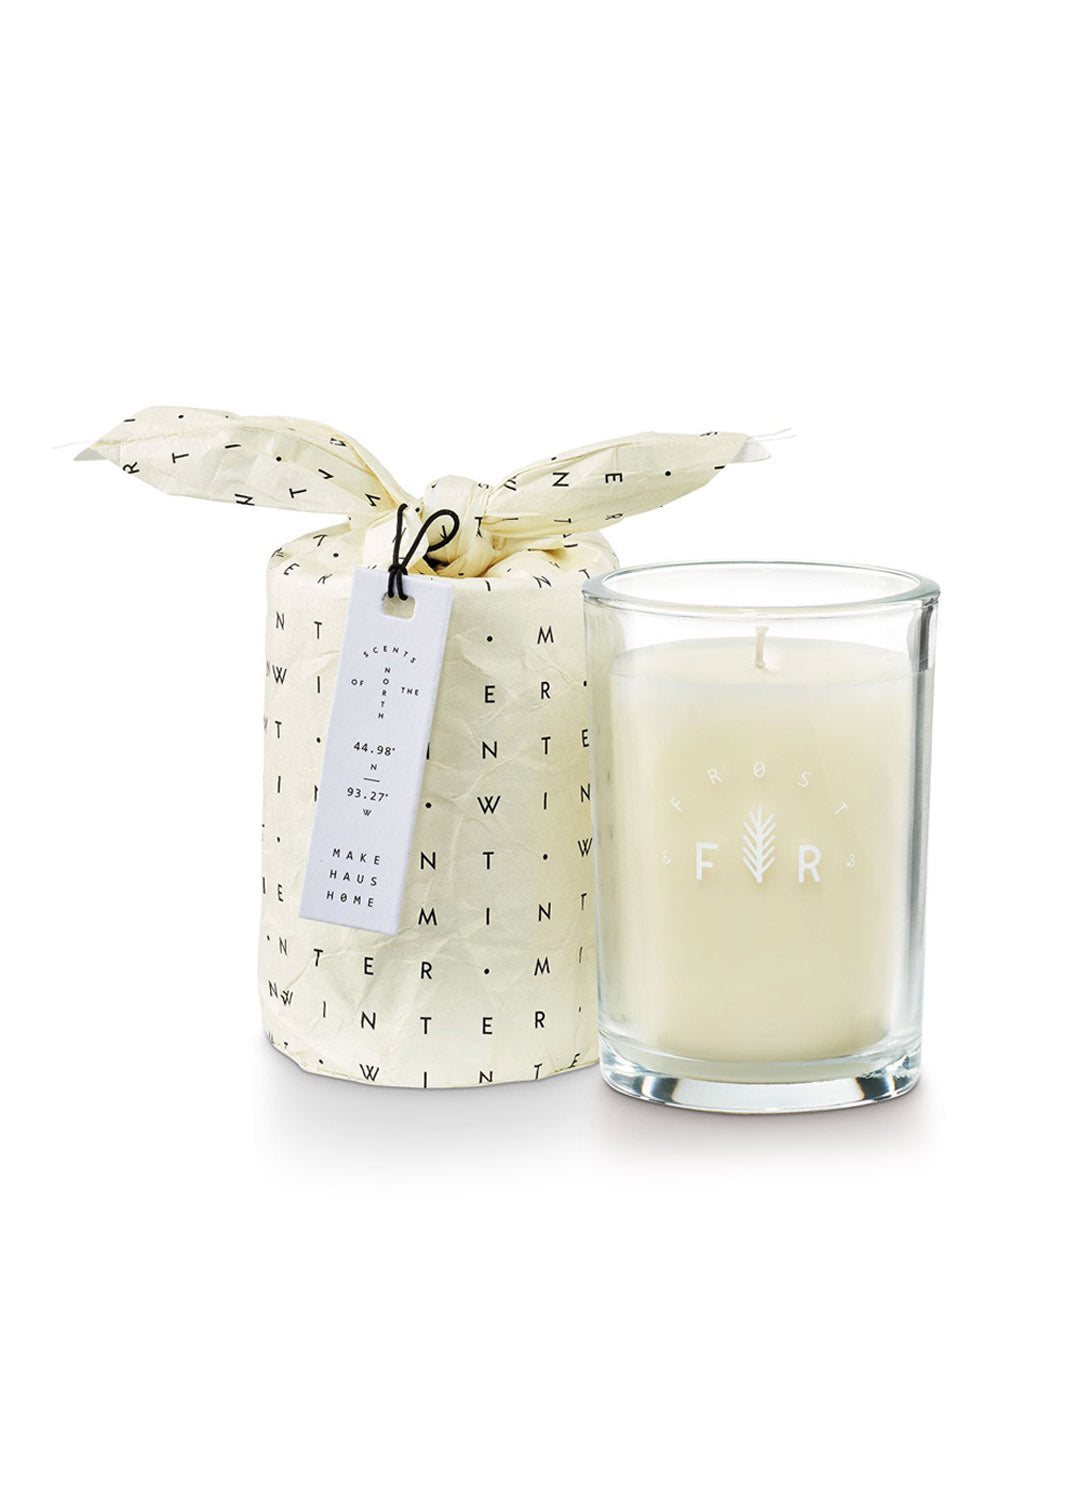 Frost & Fir Bagged Glass Soy Candle - FINAL SALE Home & Lifestyle Winter Mint